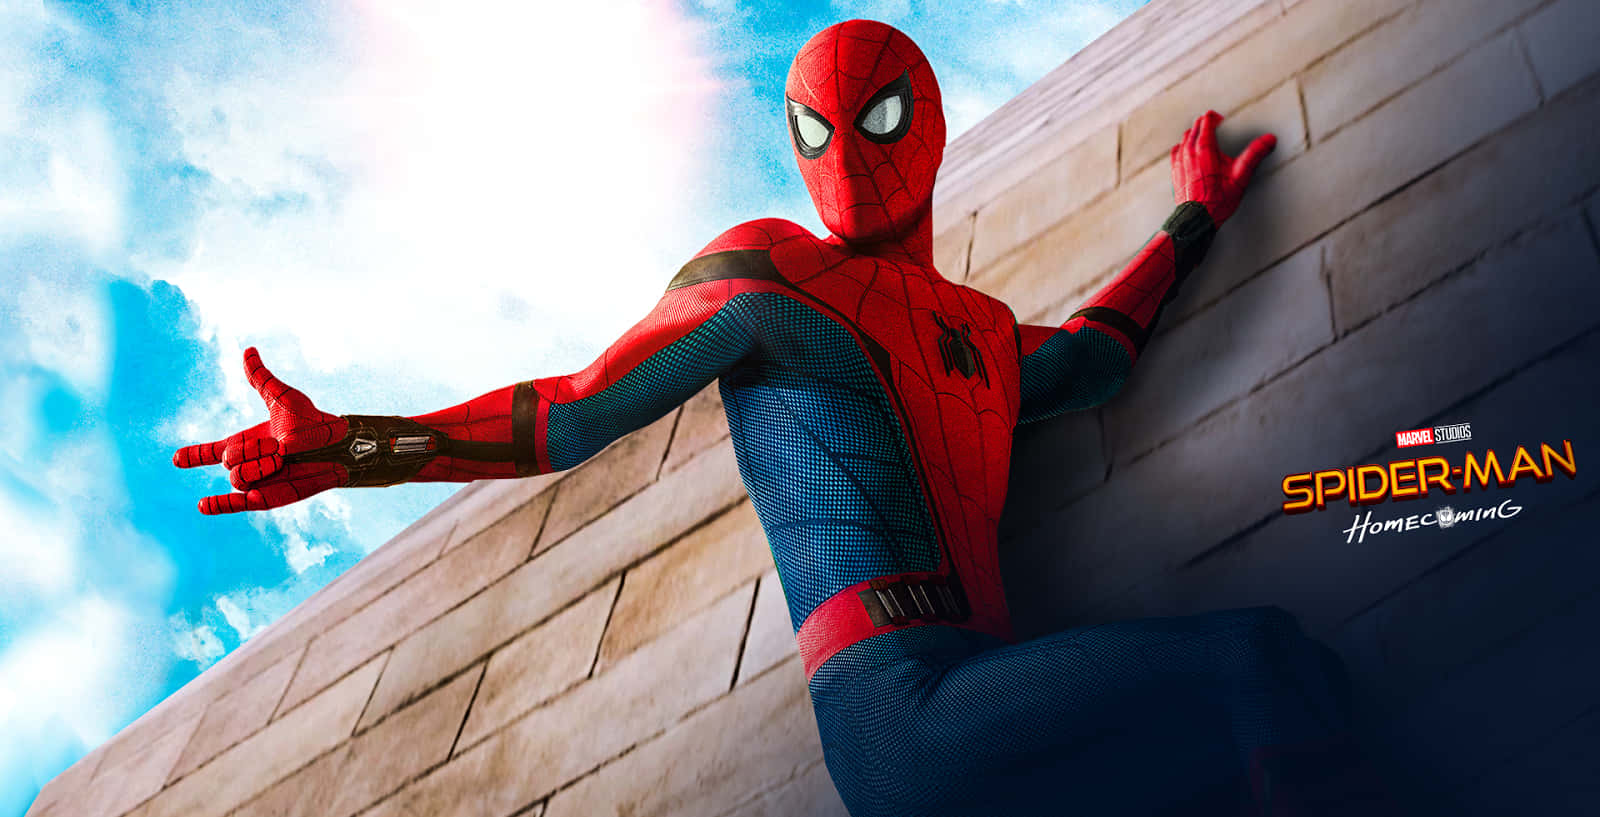 Join Spider-Man on his adventures in 'Spider-Man: Homecoming' Wallpaper